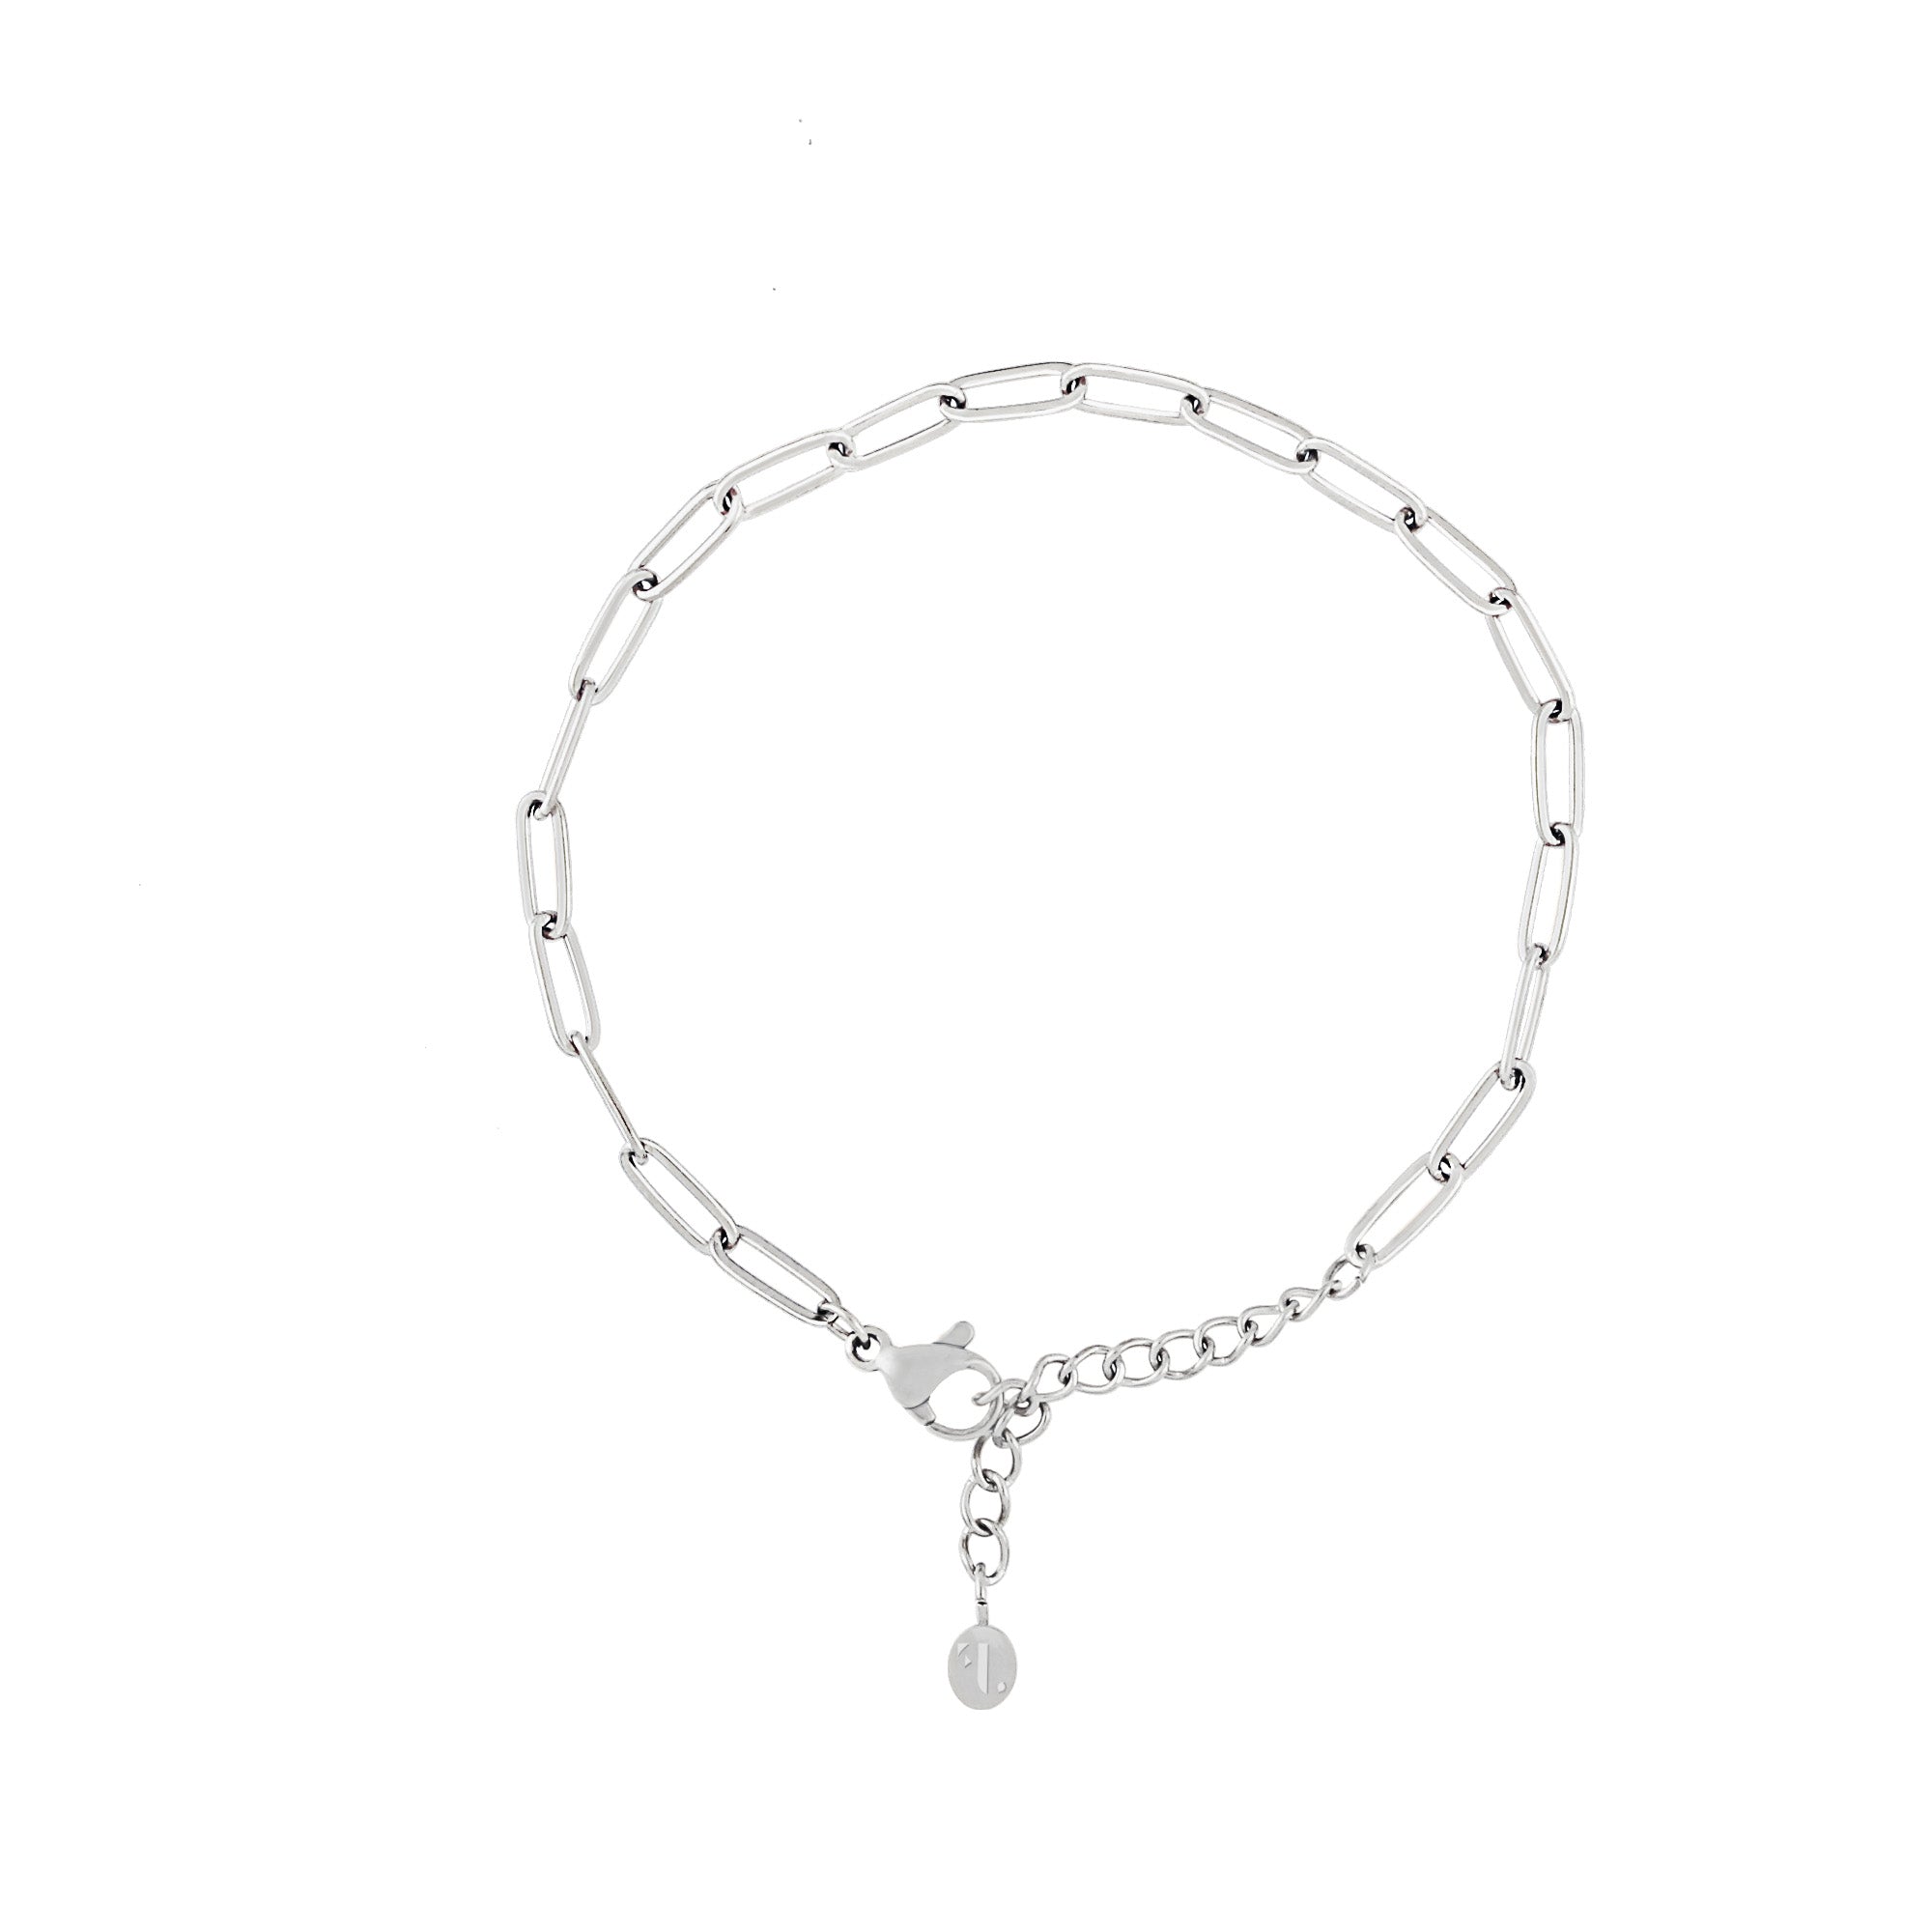 Maritsa women's bracelet by Five Jwlry, crafted from a 3mm paperclip chain in silver-colored, water-resistant 316L stainless steel. Available in size 16cm with a 4cm extension. Hypoallergenic with a 2-year warranty.